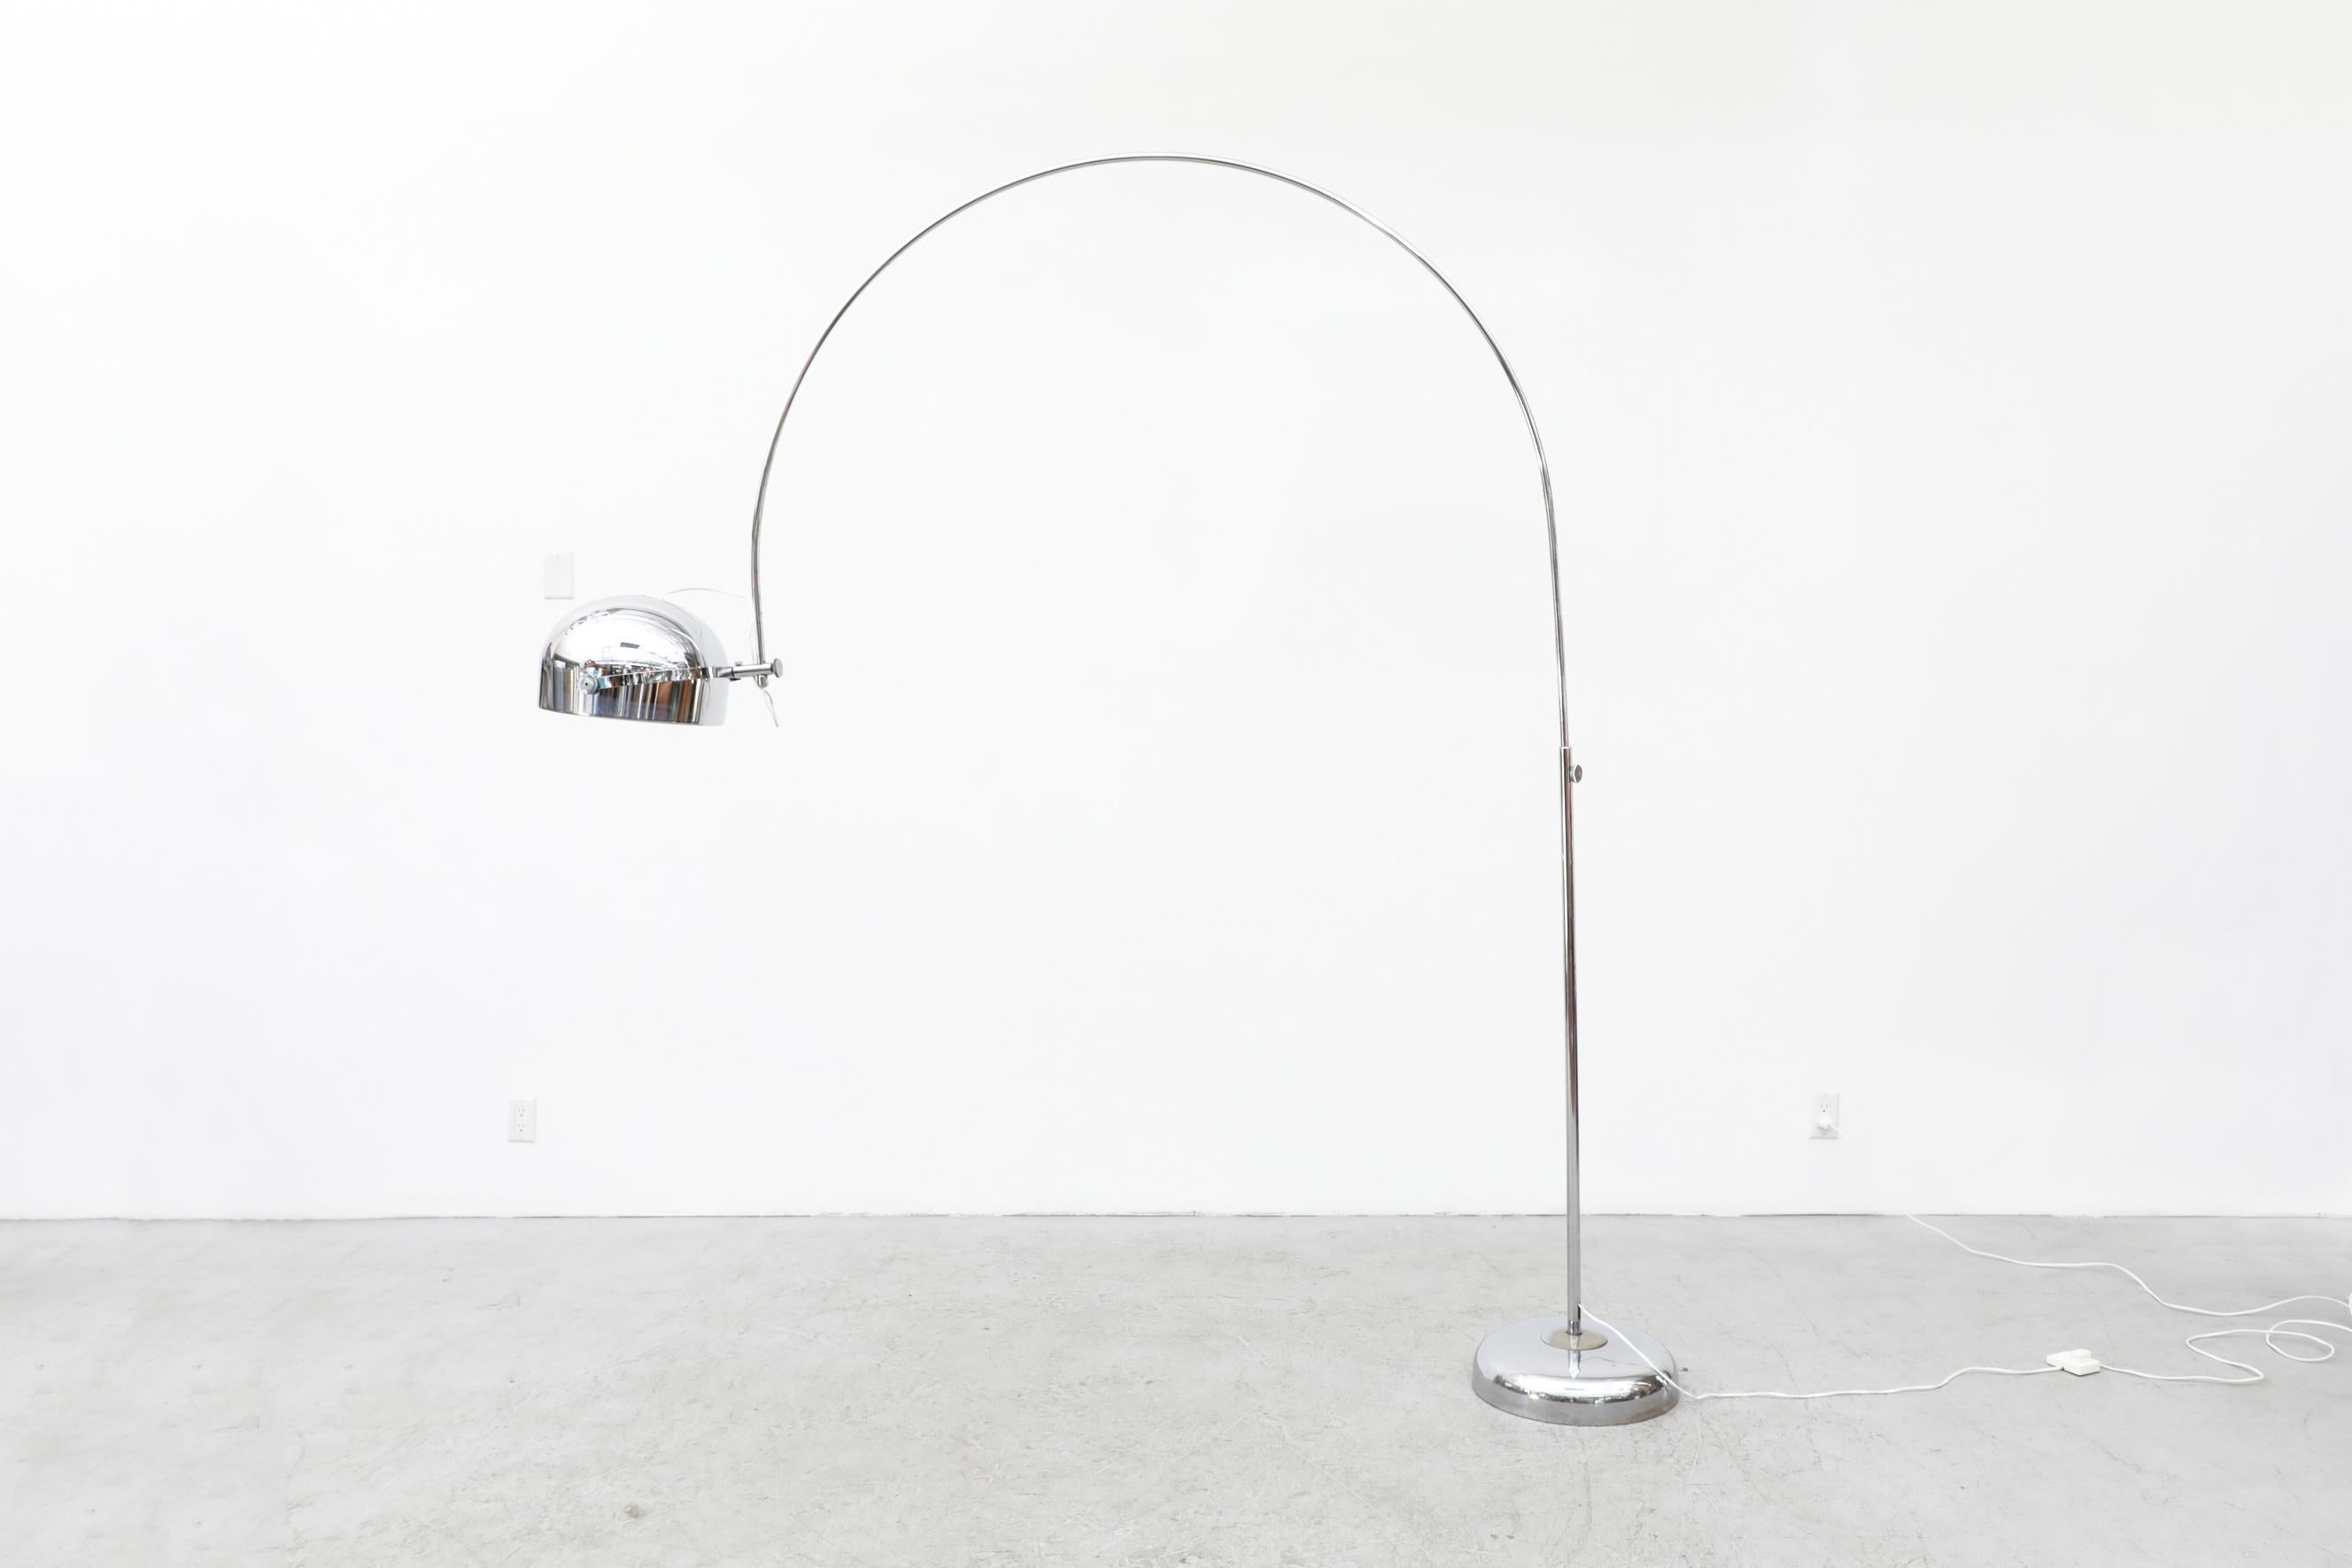 Mid-century chrome plated arc lamp with a weighted base by Gepo. The shade can be rotated and positioned in varying ways. In original condition with some minor chrome pitting and a slight dent to the shade. Wear is consistent with its age and use.